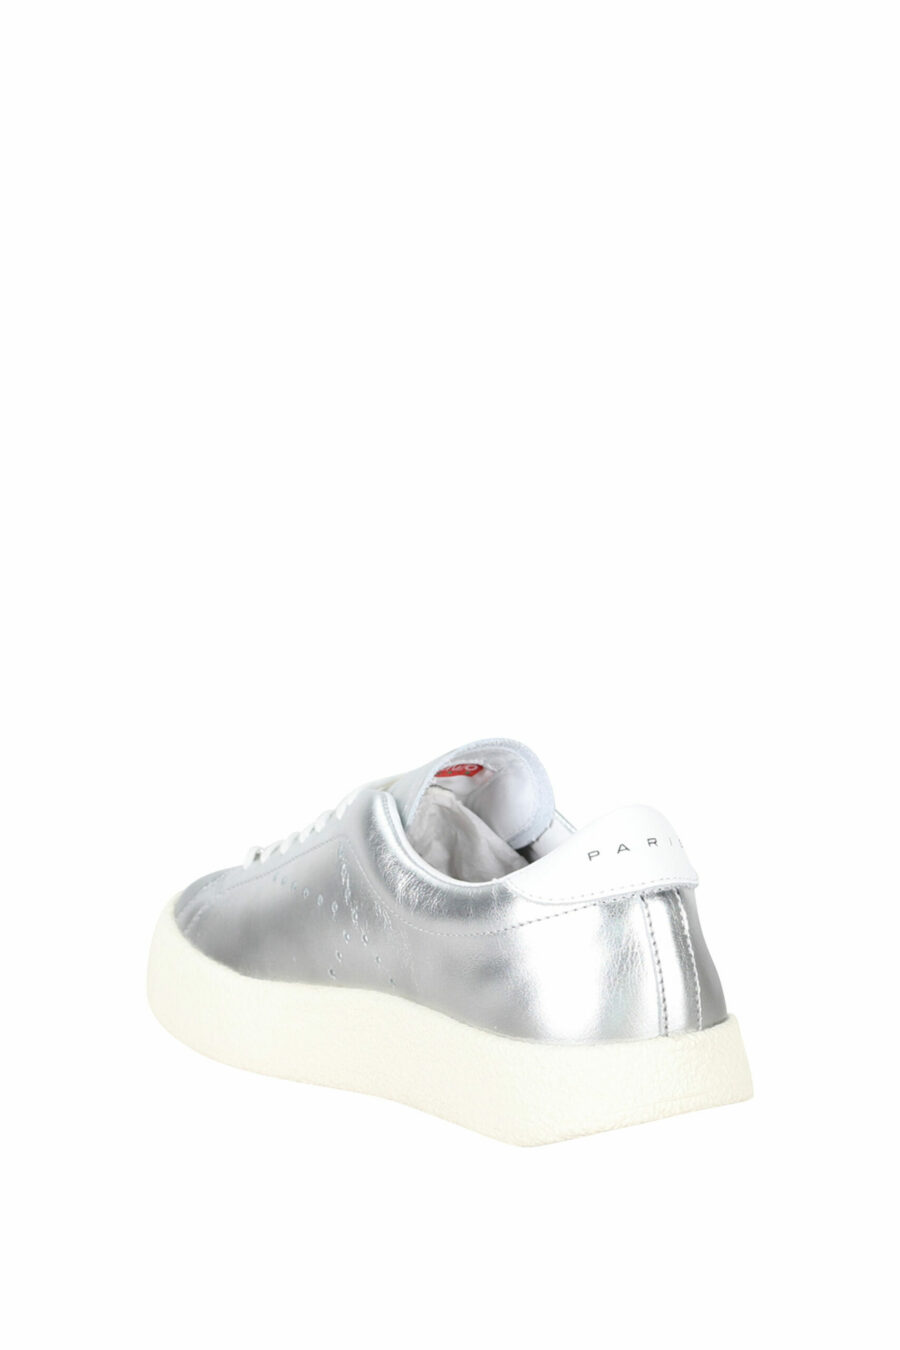 Silver shoes with black mini-logo - 3612230556461 3 scaled